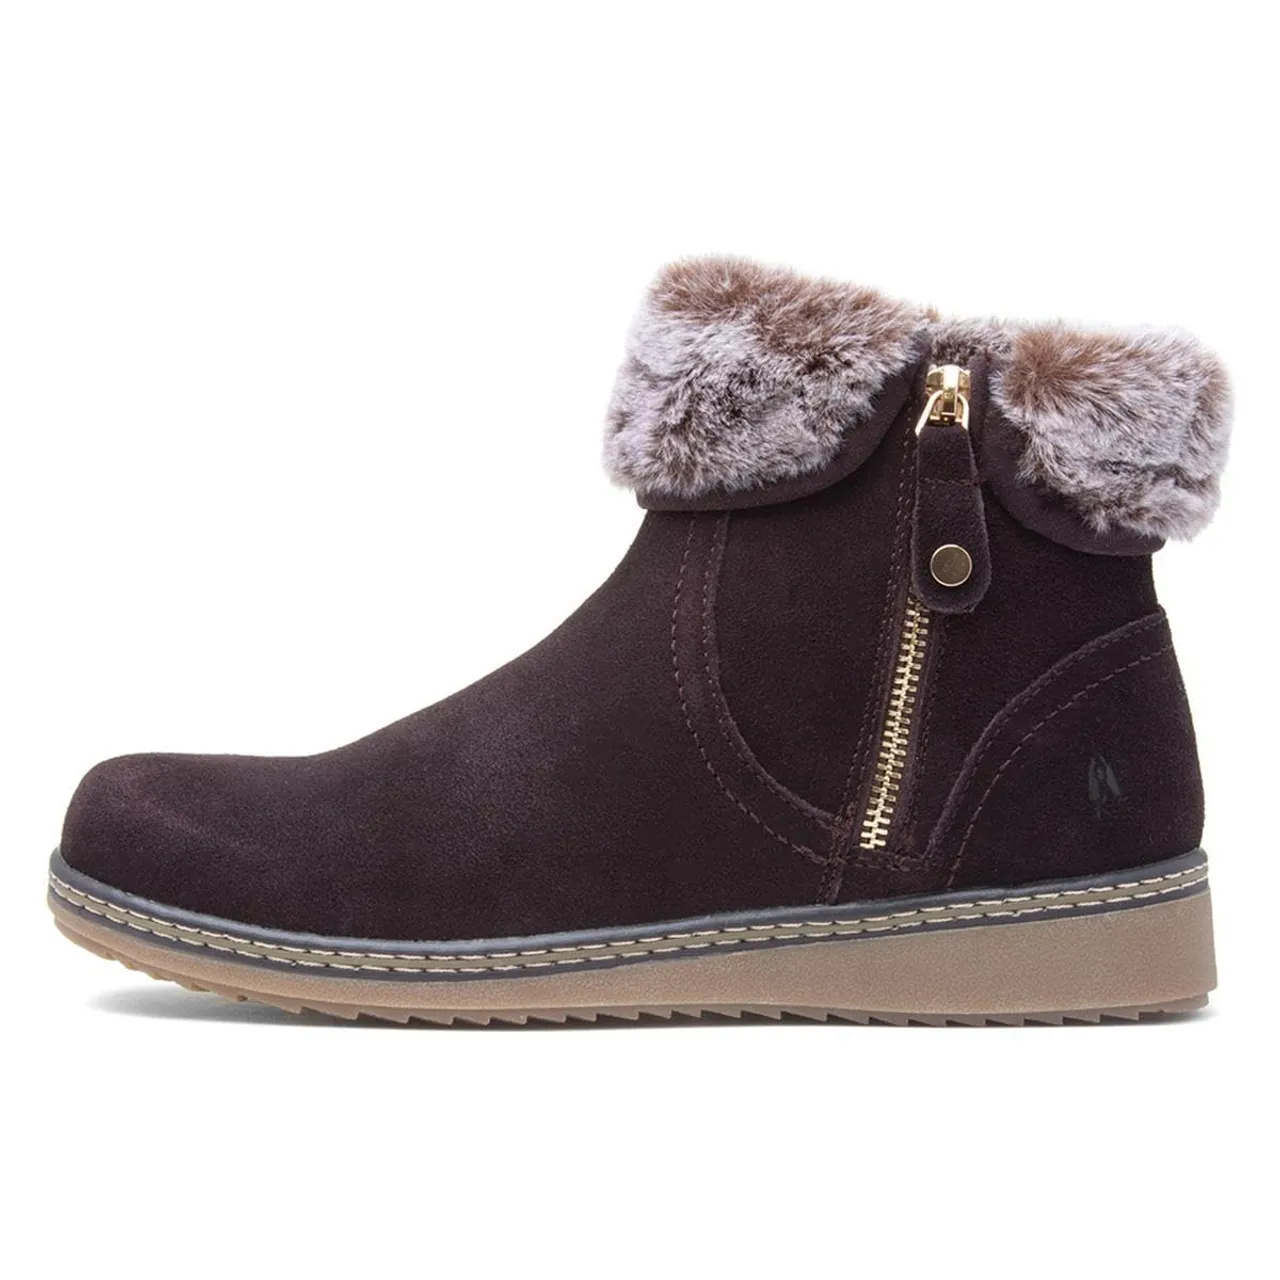 Hush Puppies Women's Penny Ankle Boot